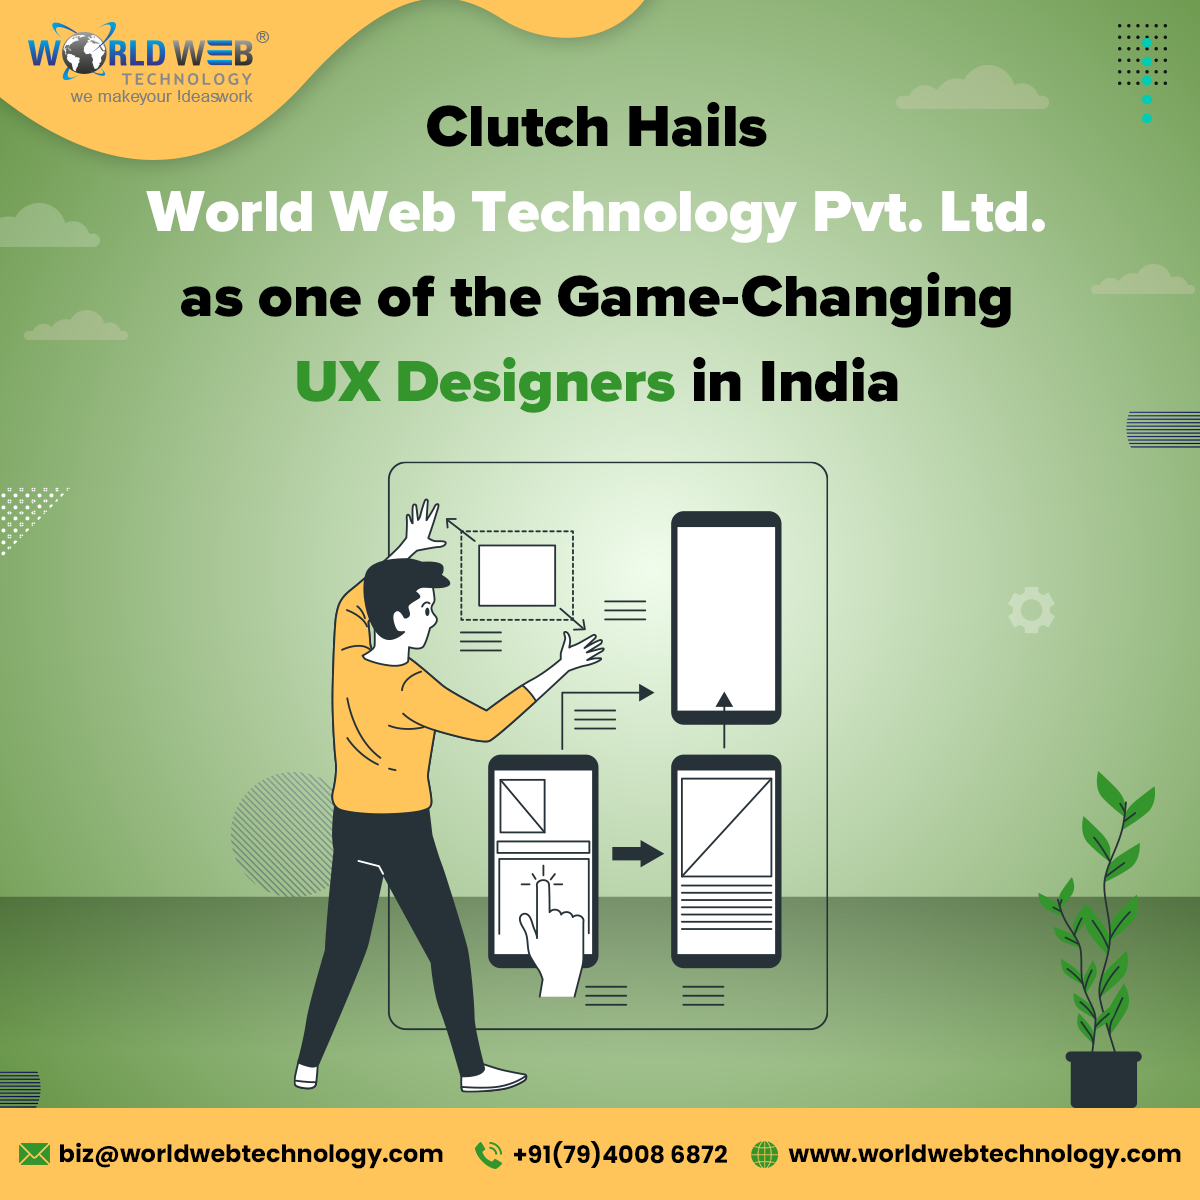 Clutch Hails World Web Technology Game-Changing UX Designers in India - New York Computer